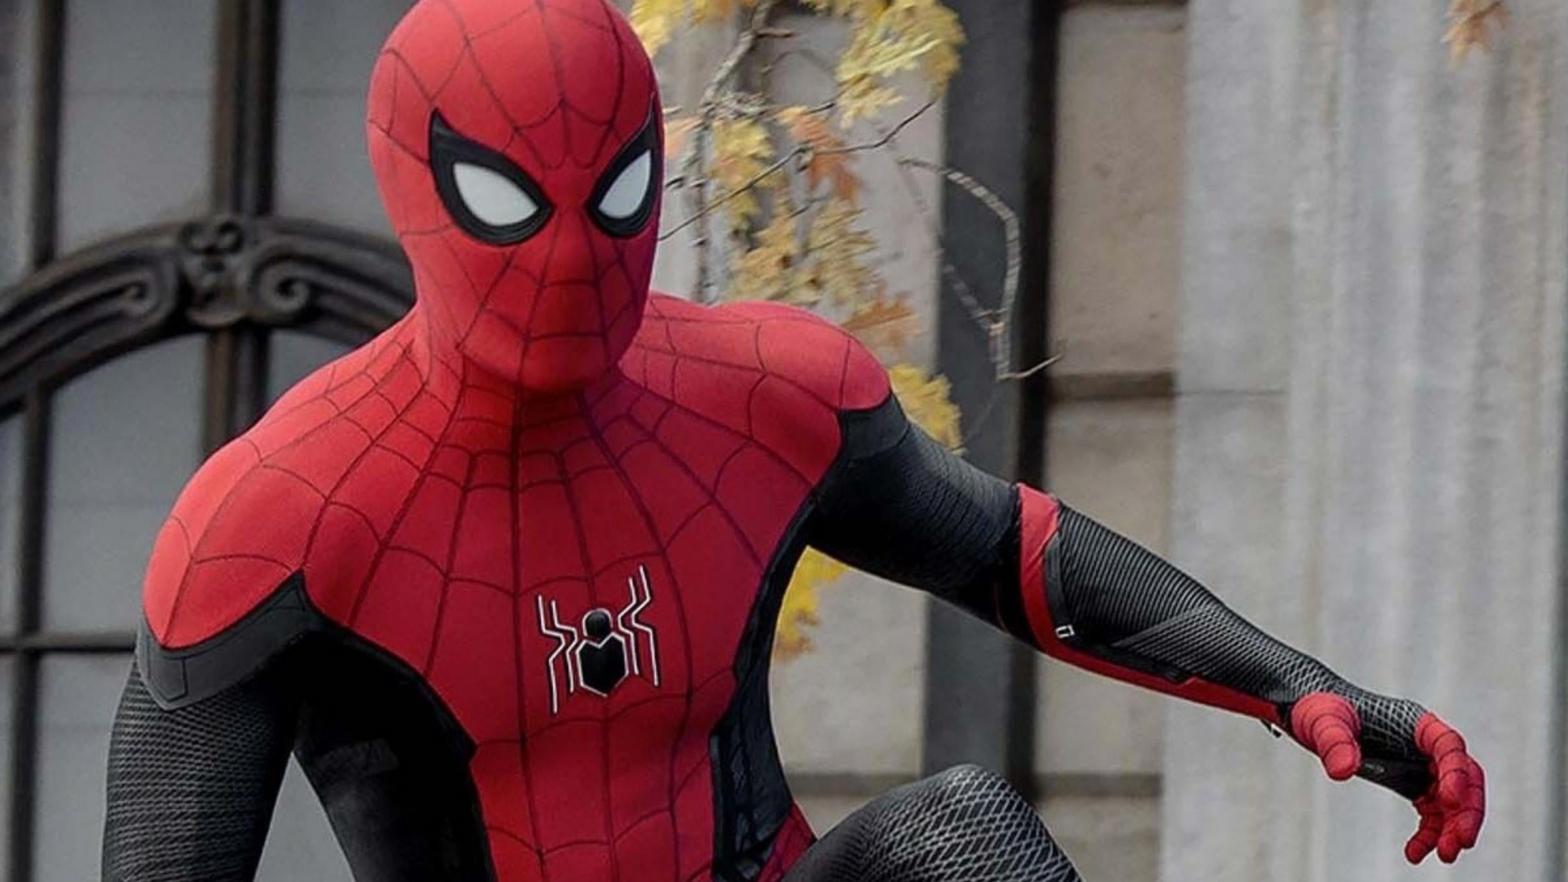 Sony just dated what we think are two new Spider-Man movies. (Image: Sony)